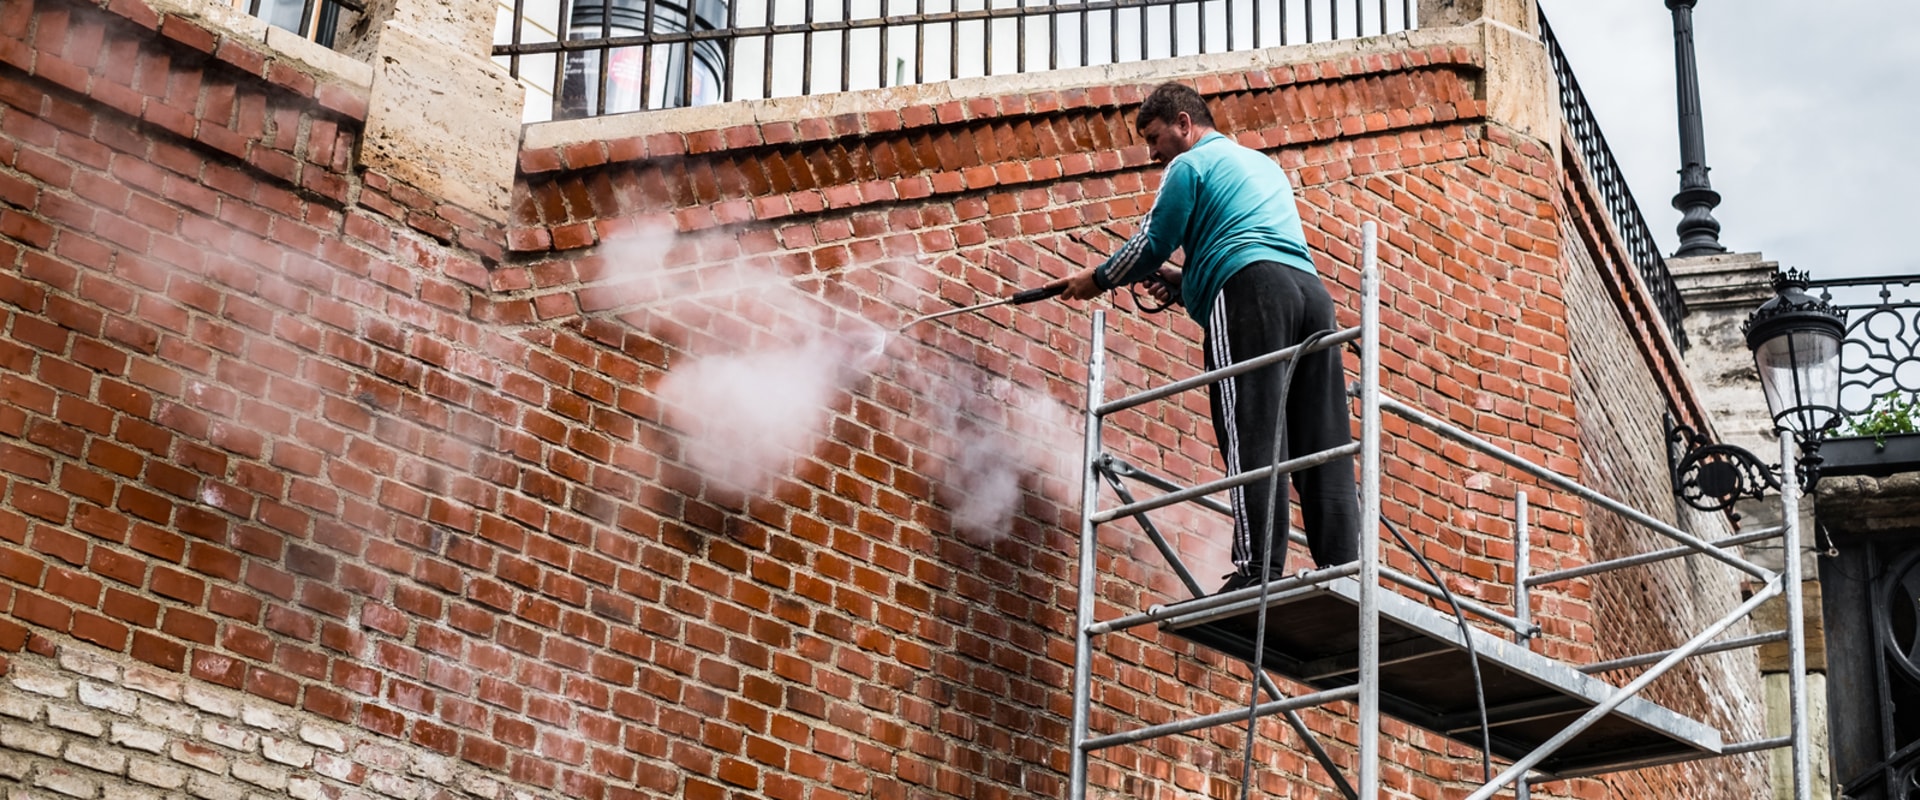 Elevate Your Business Image With Commercial Pressure Cleaning Services In West Chester, OH